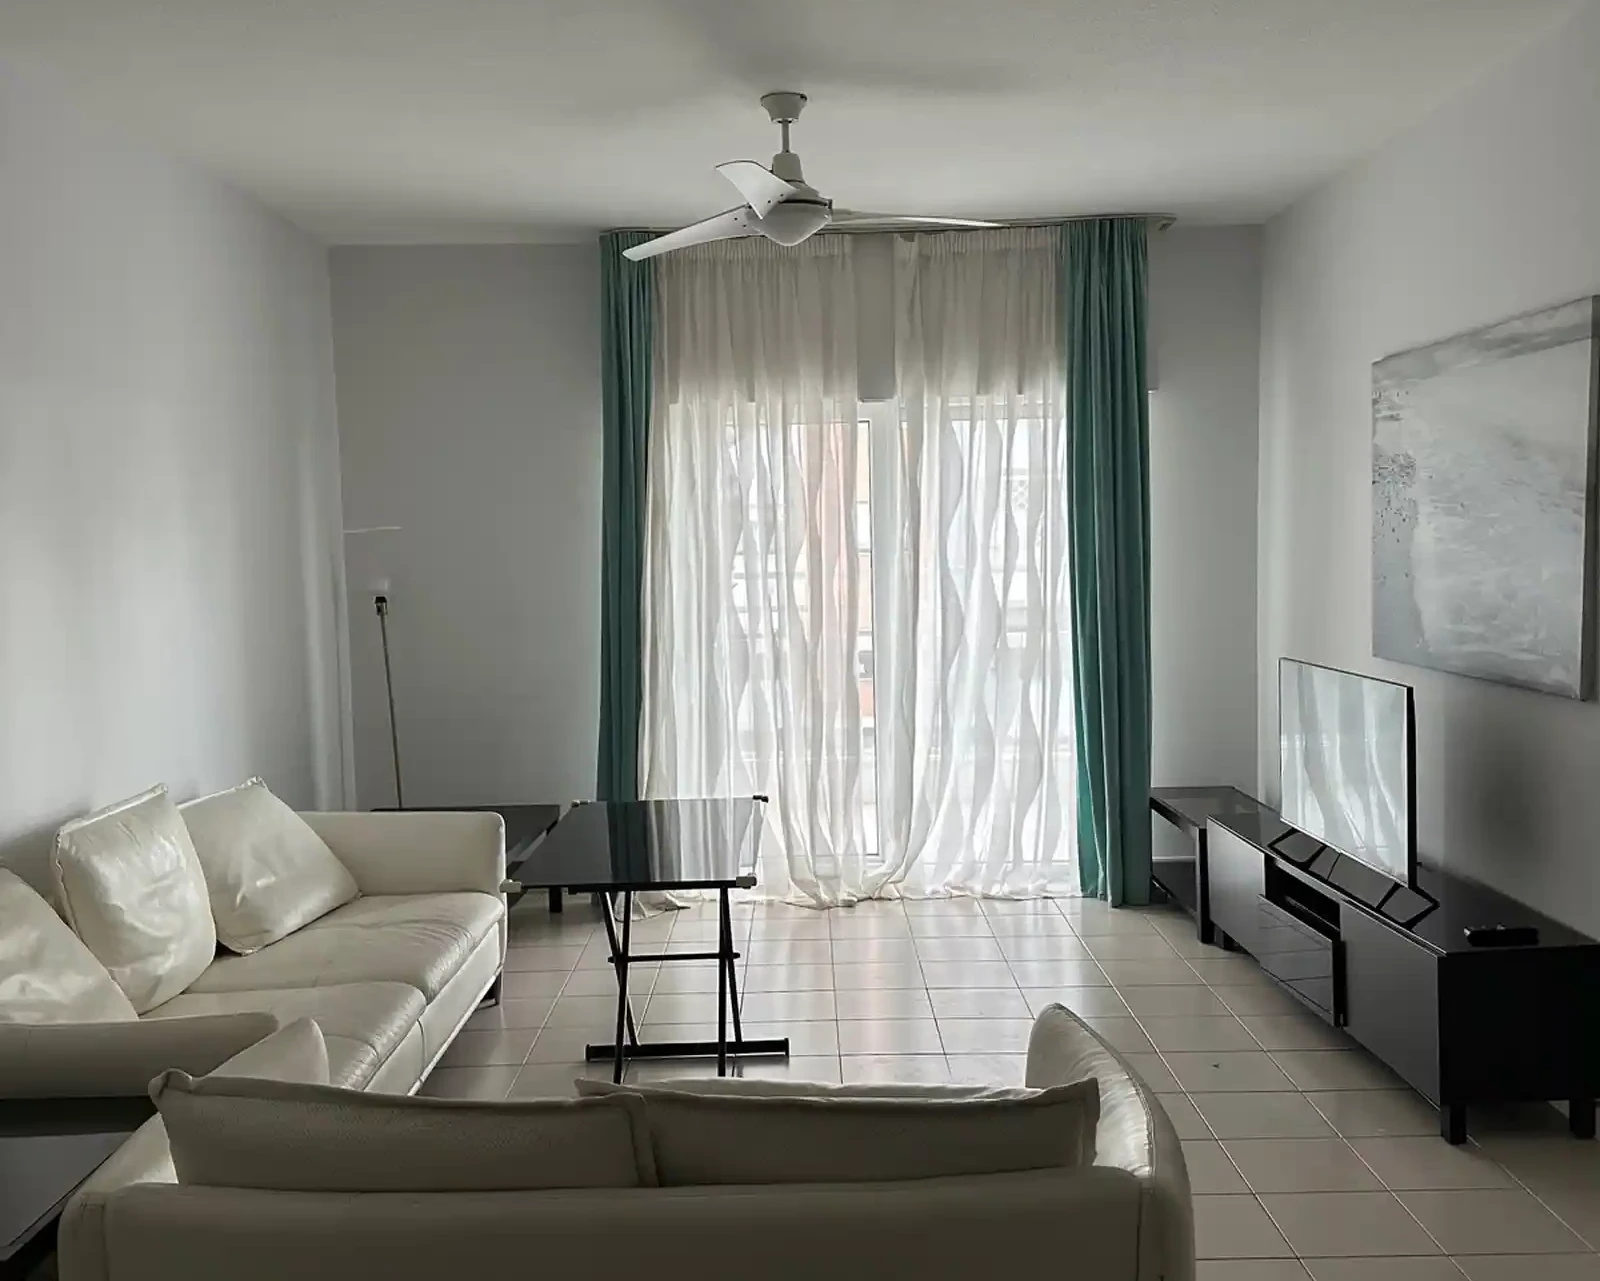 2-bedroom apartment to rent €1.900, image 1